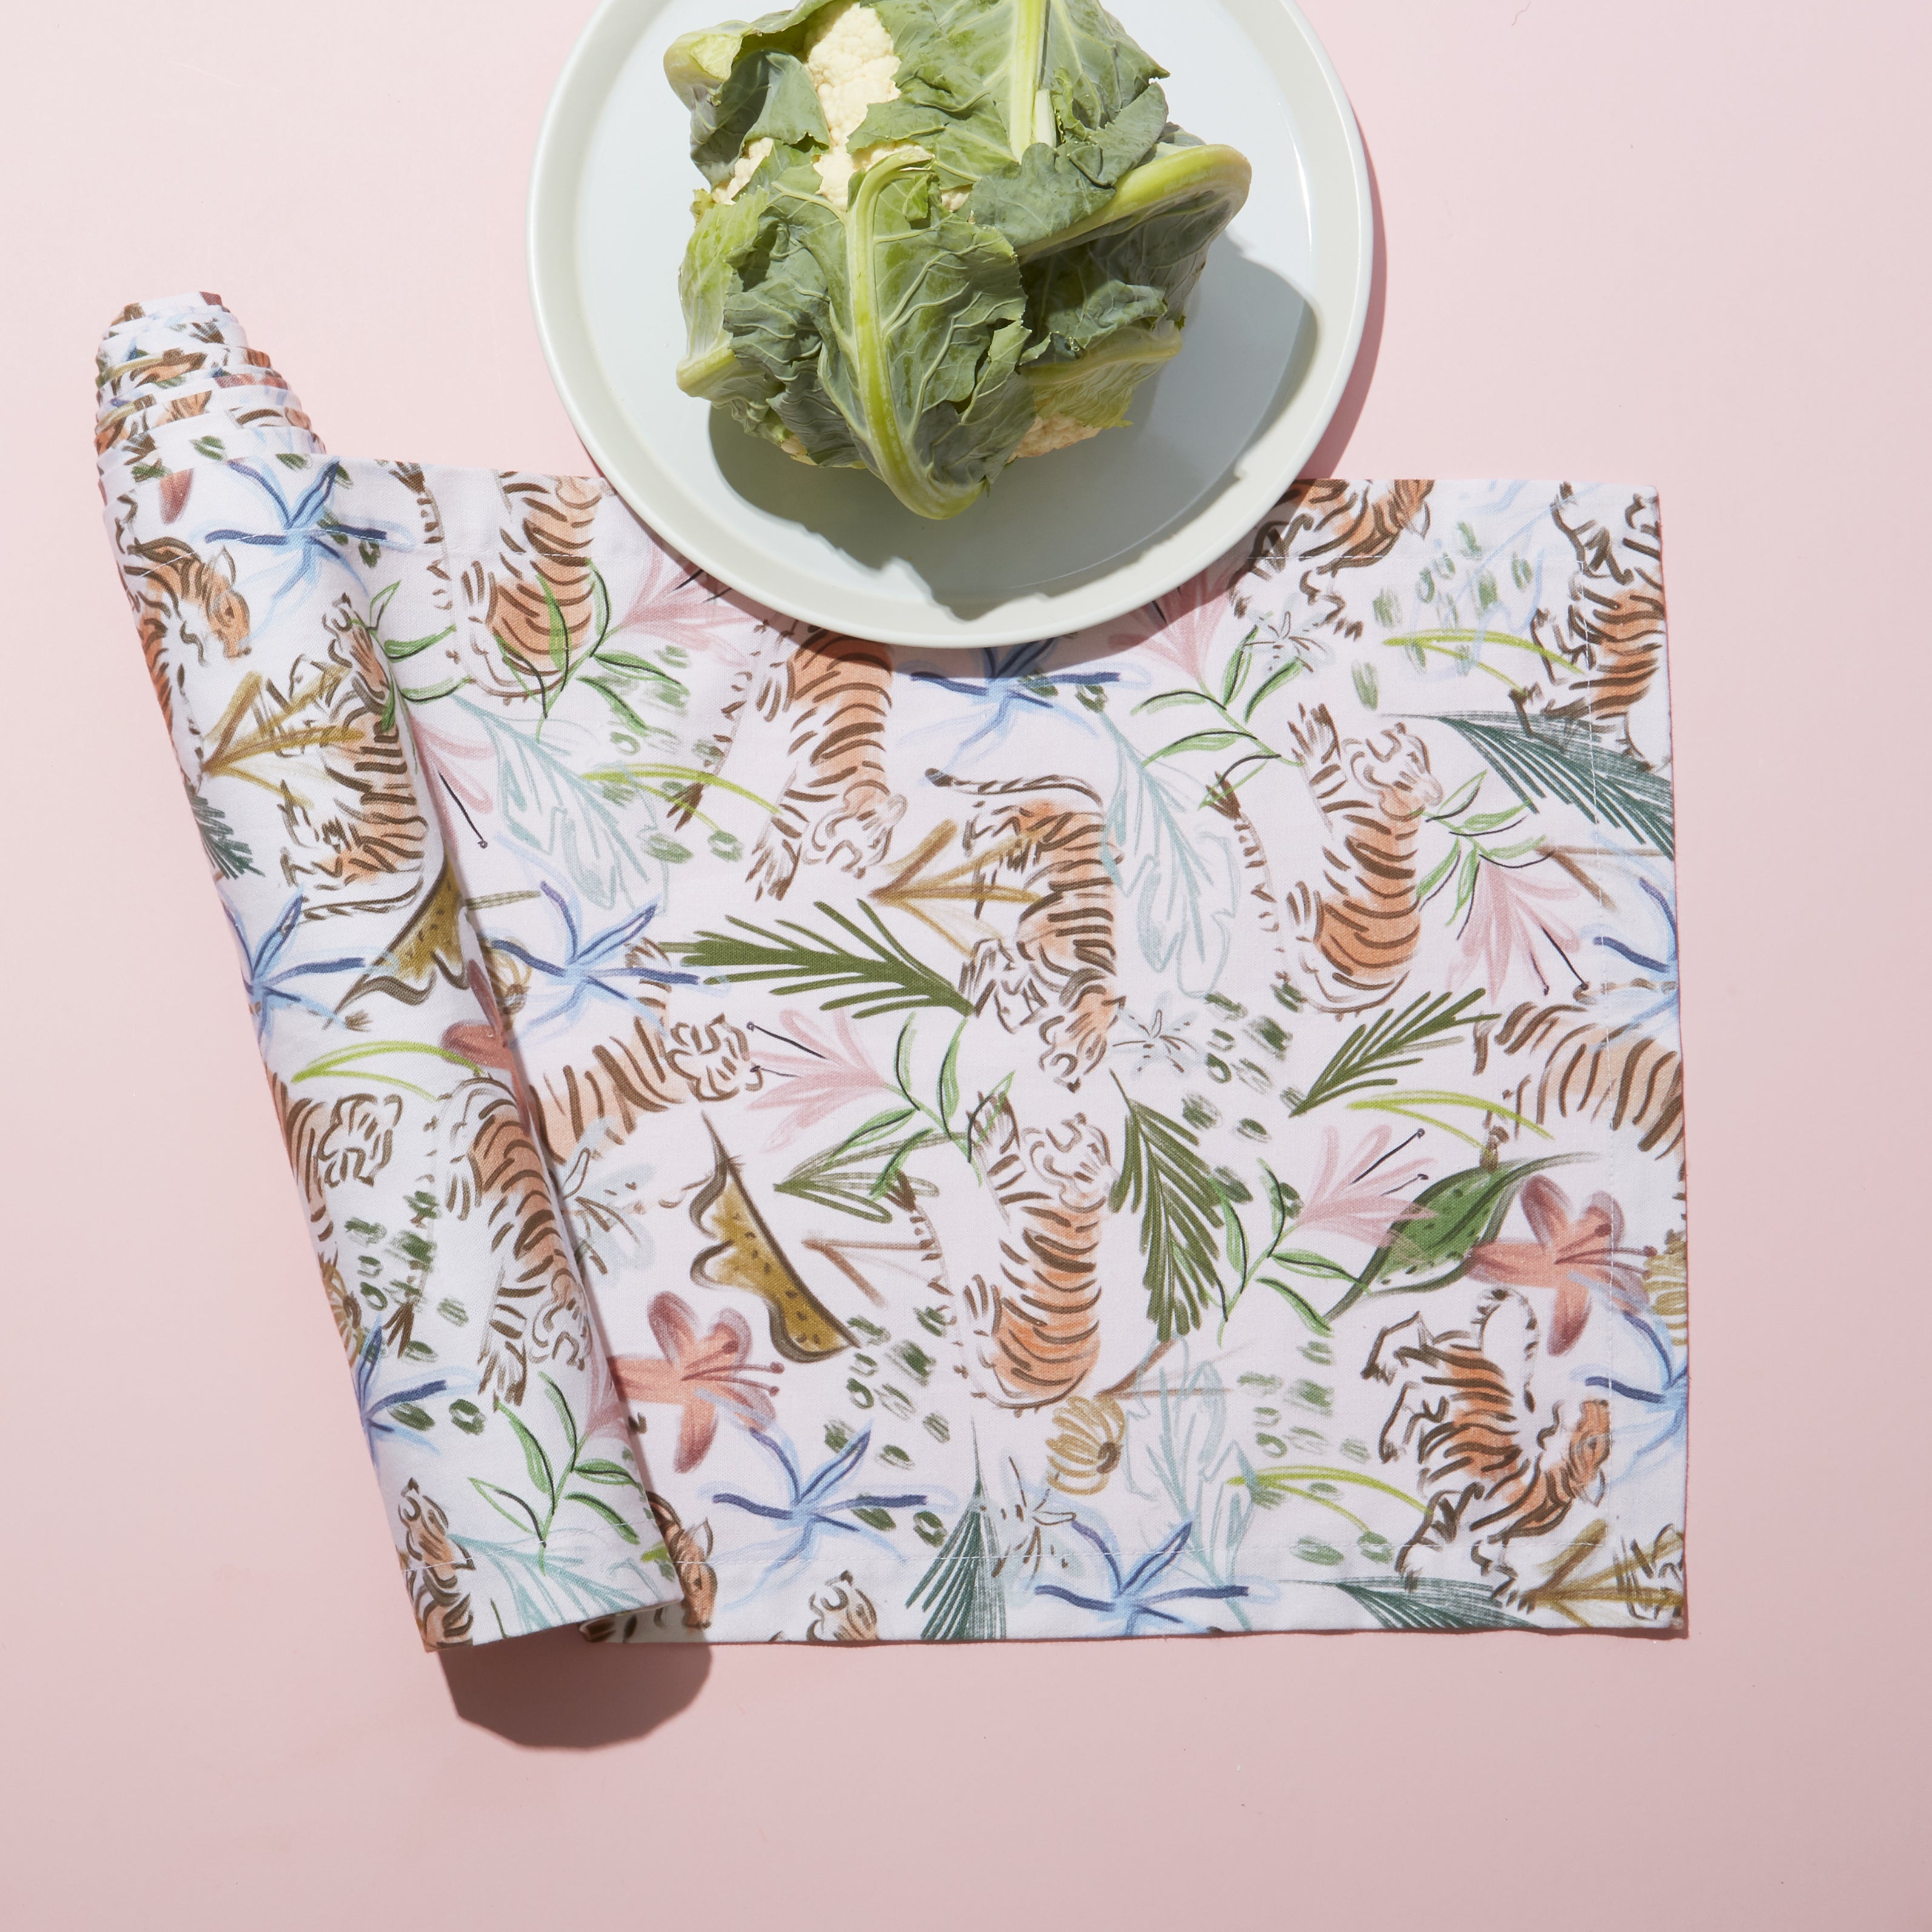 Rolled Pink Chinoiserie Tiger Printed Table Runner with lettuce on white plate